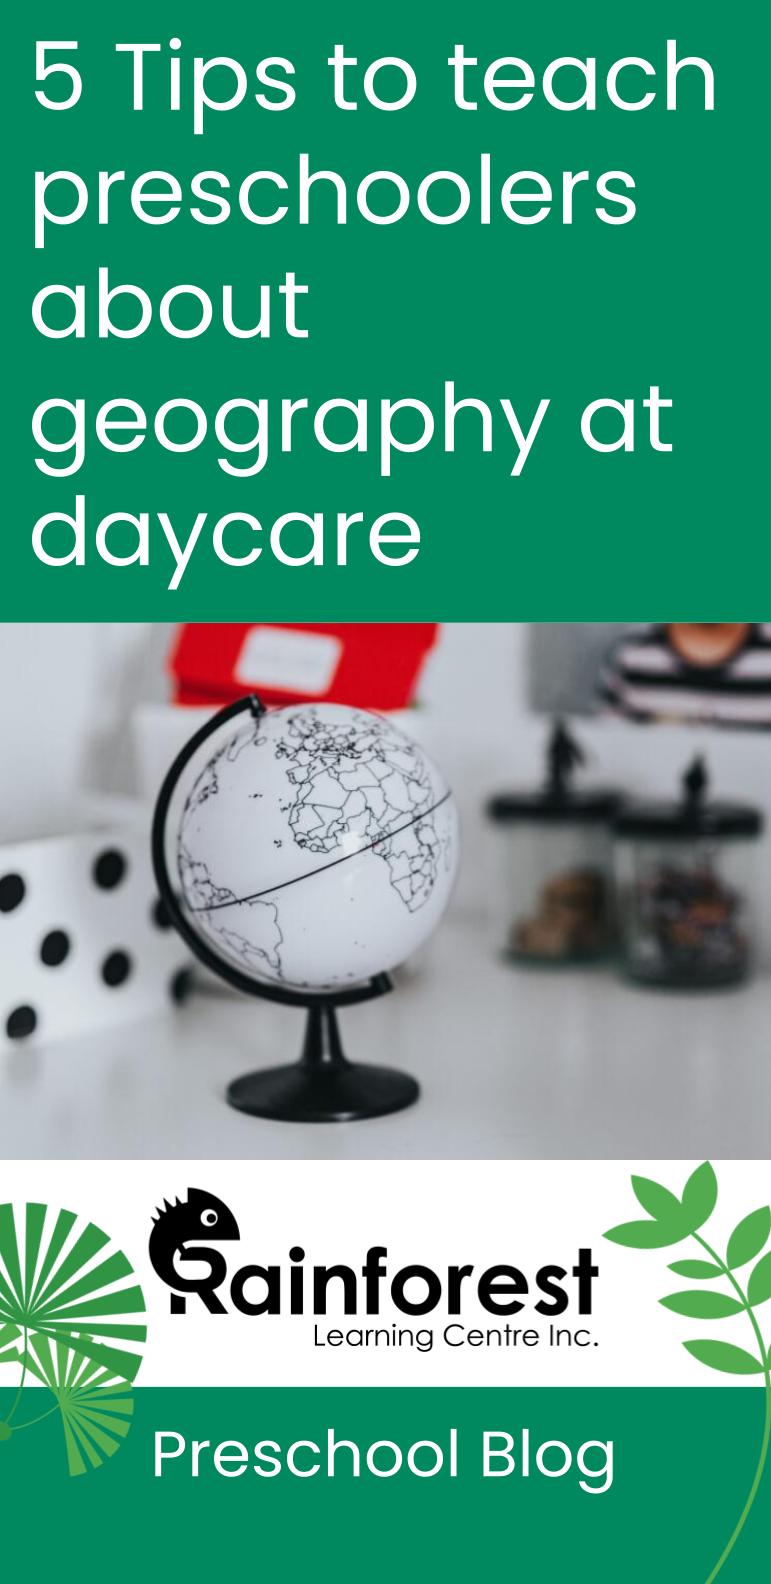 5 tips to teach preschoolers geography at daycare - blog pinterest image